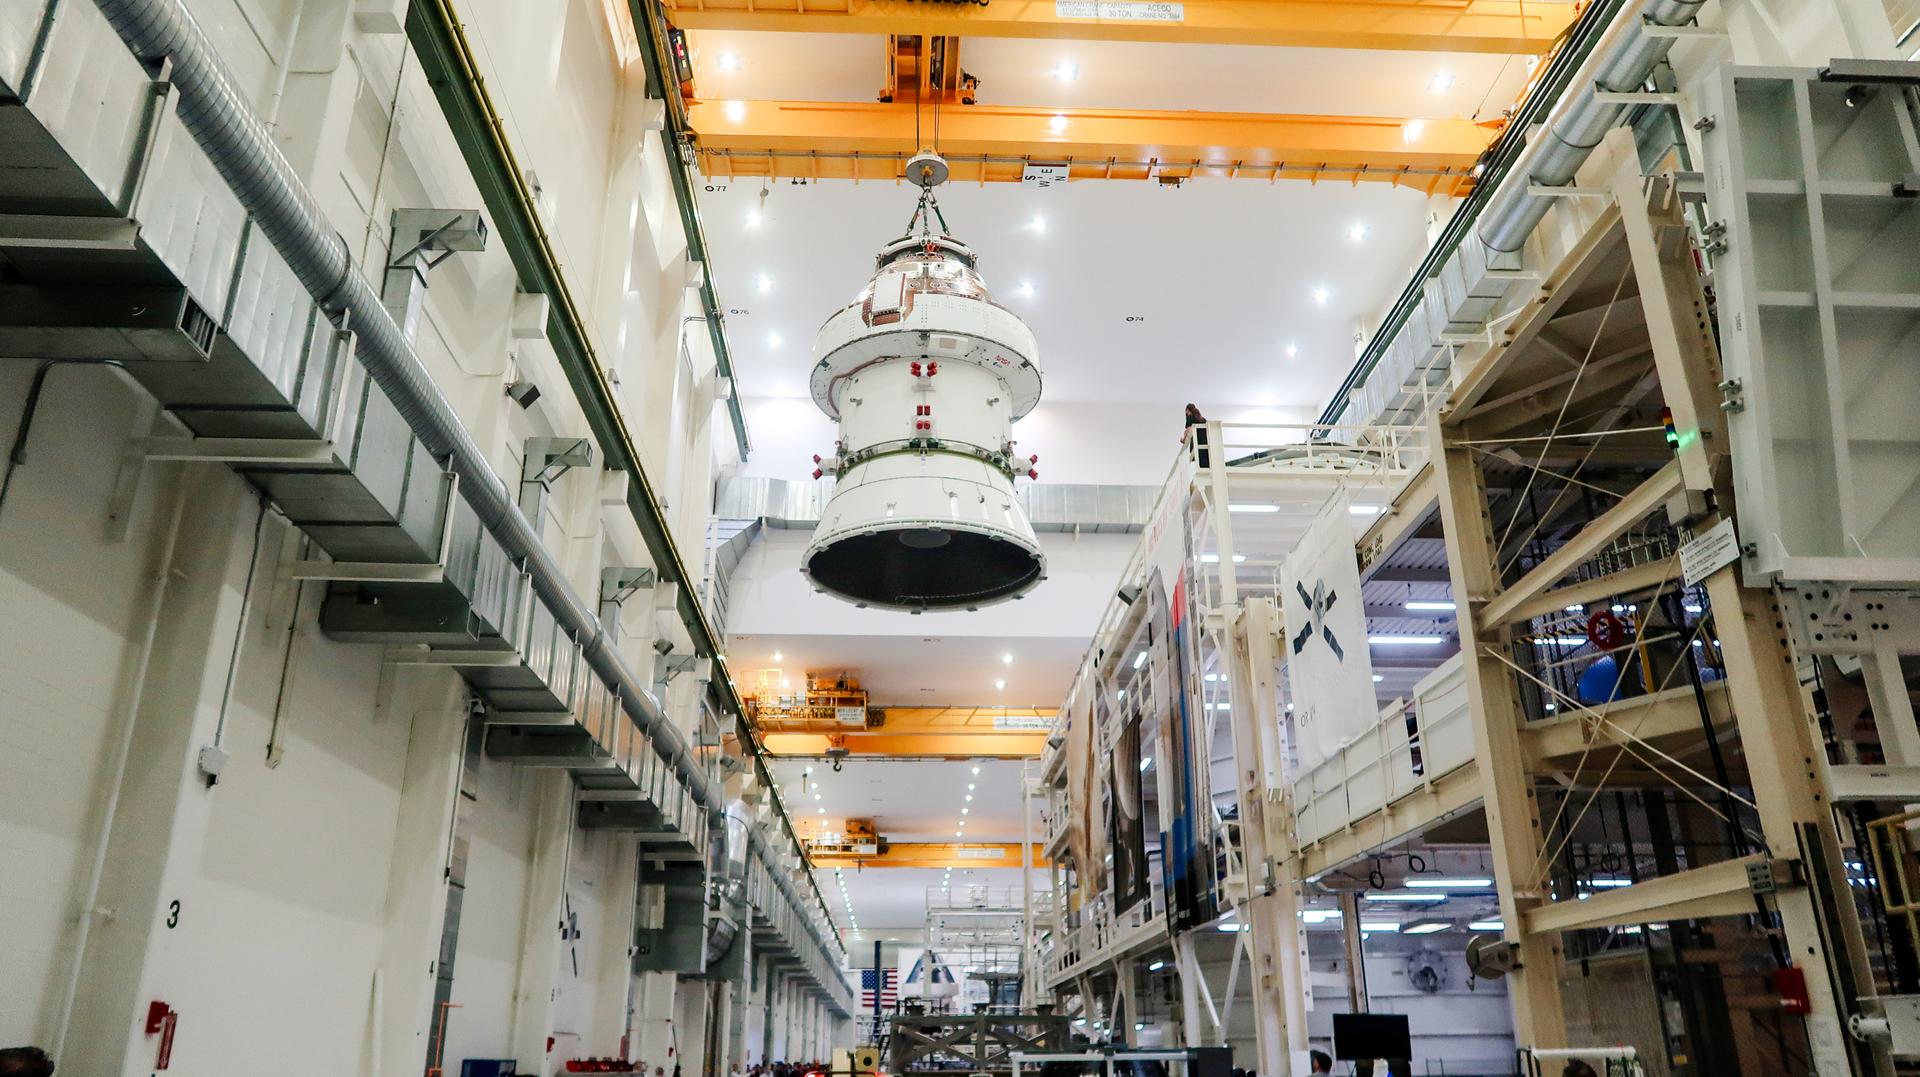 NASA Space Technology a cone-fashioned spacecraft in the rafters being hoisted between the walls